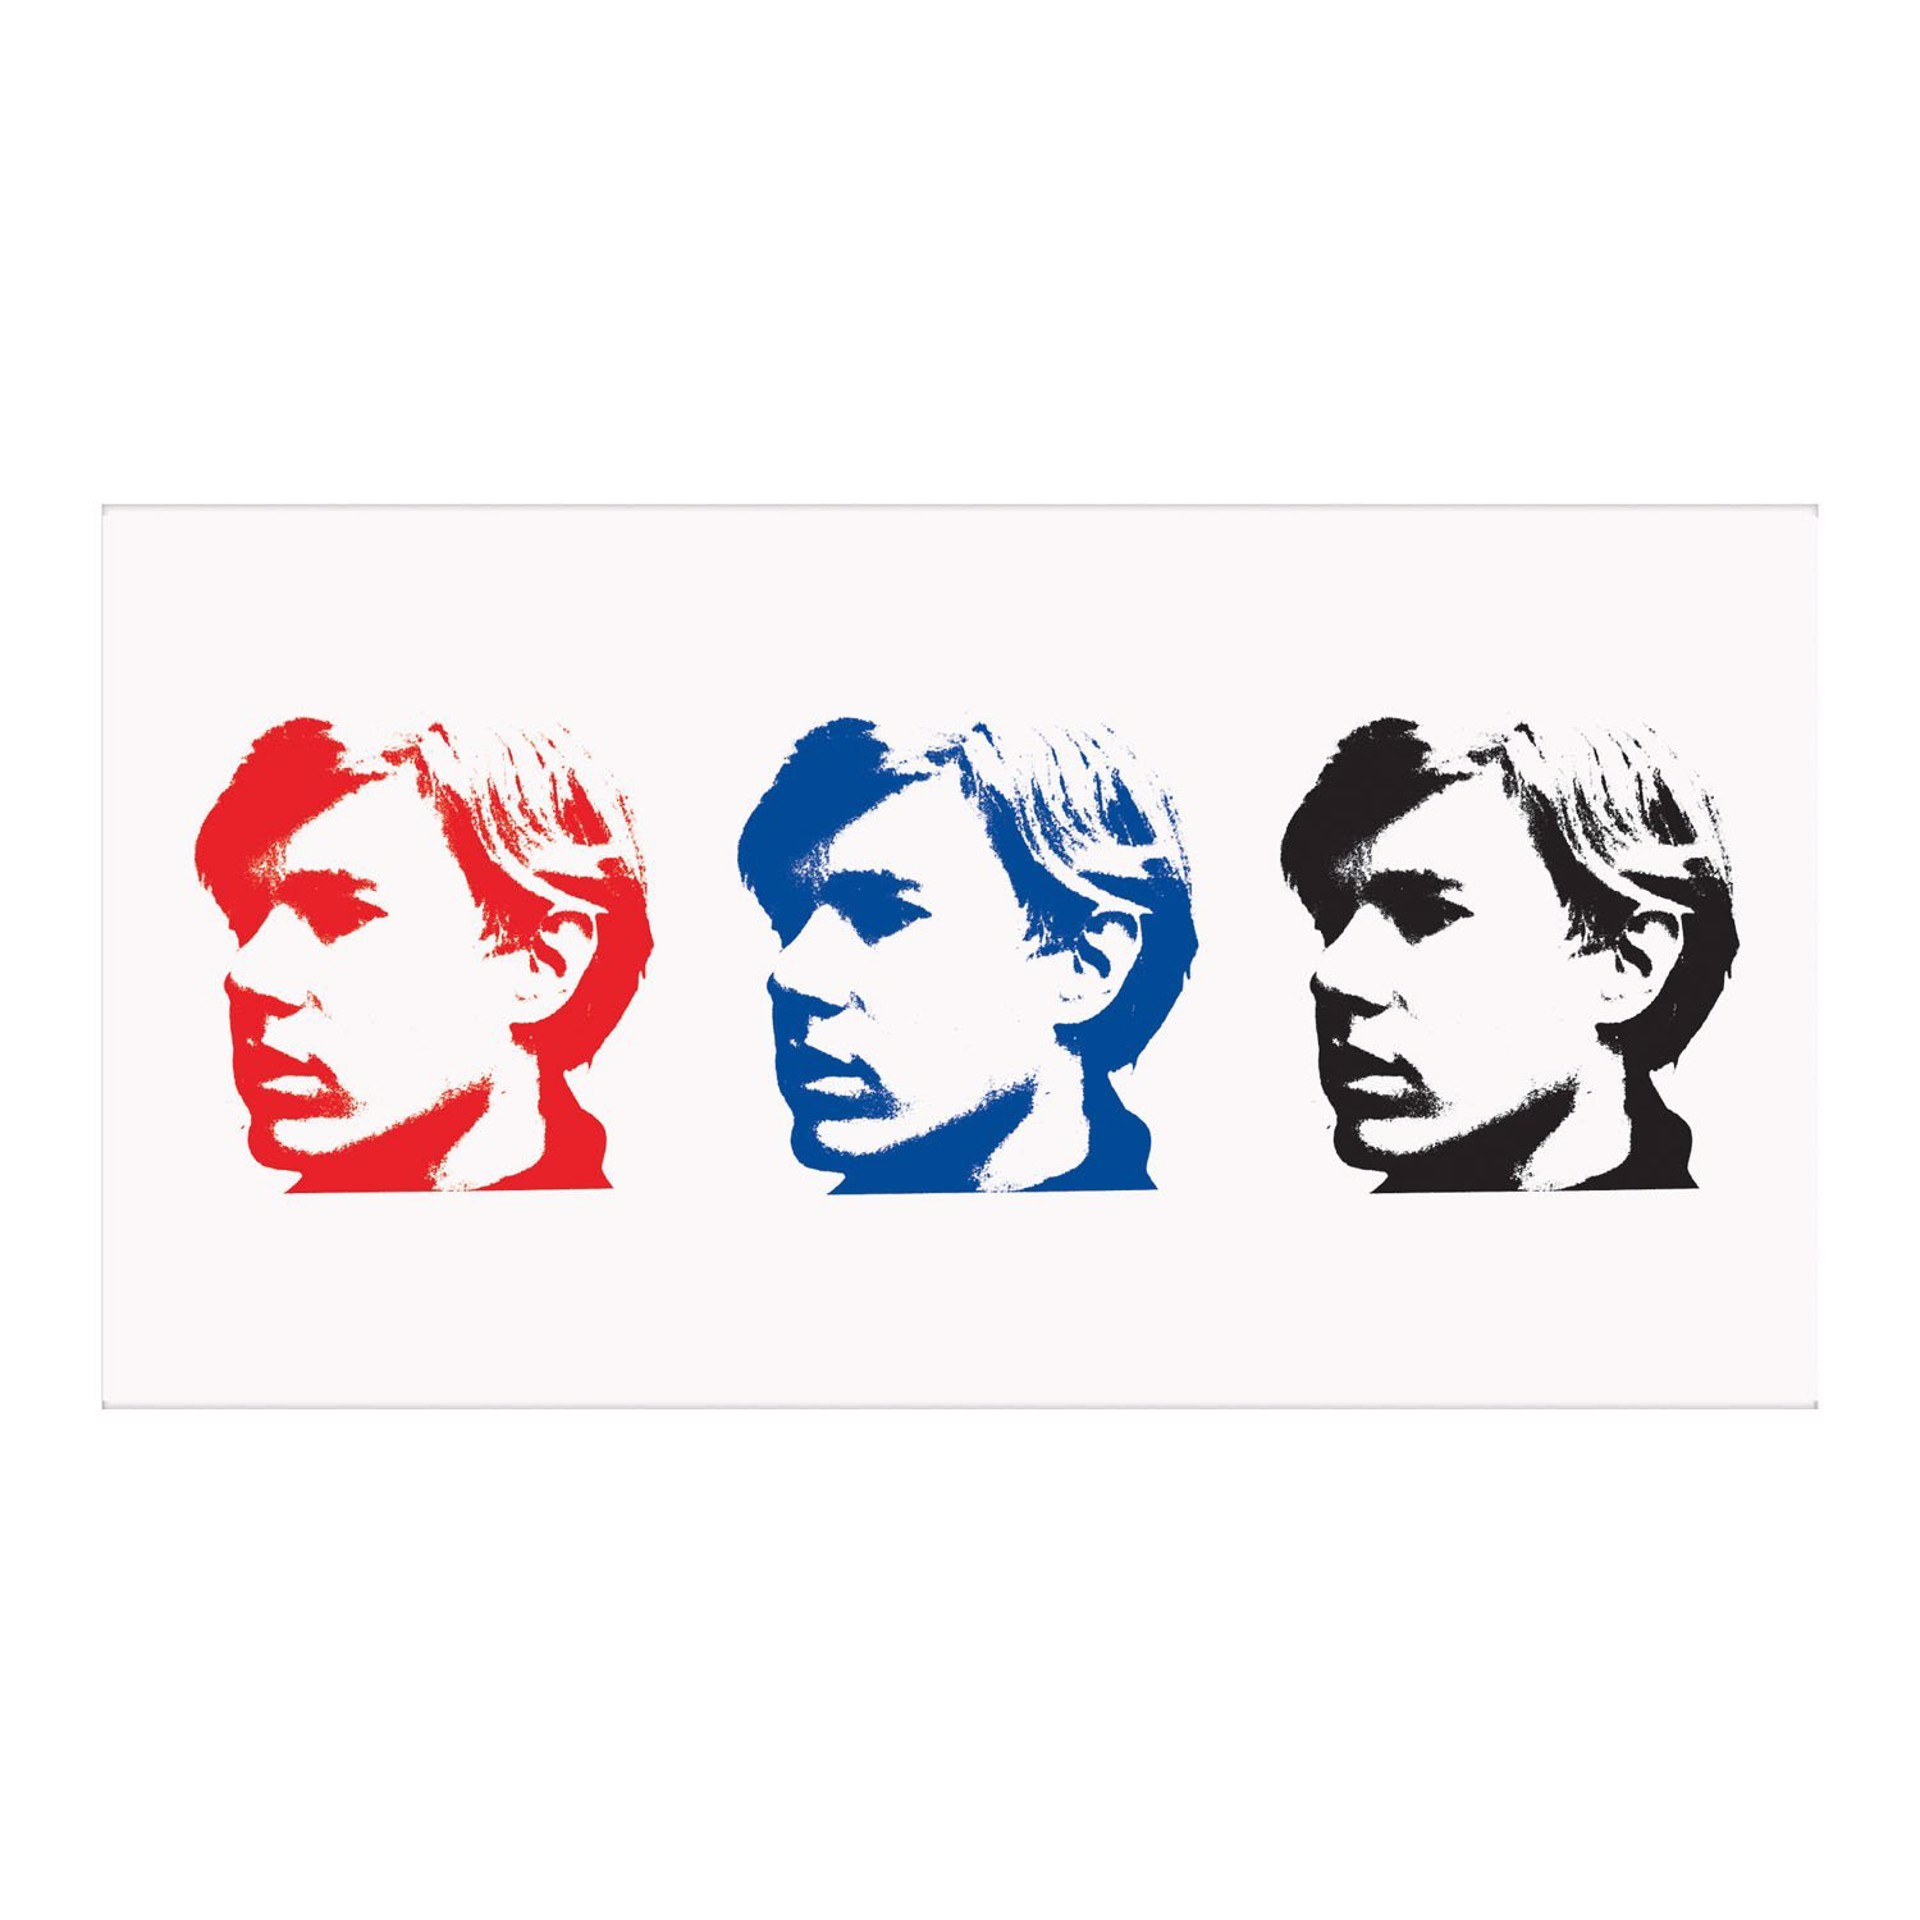 Andy Warhol Temporary Tattoo Set by Andy Warhol